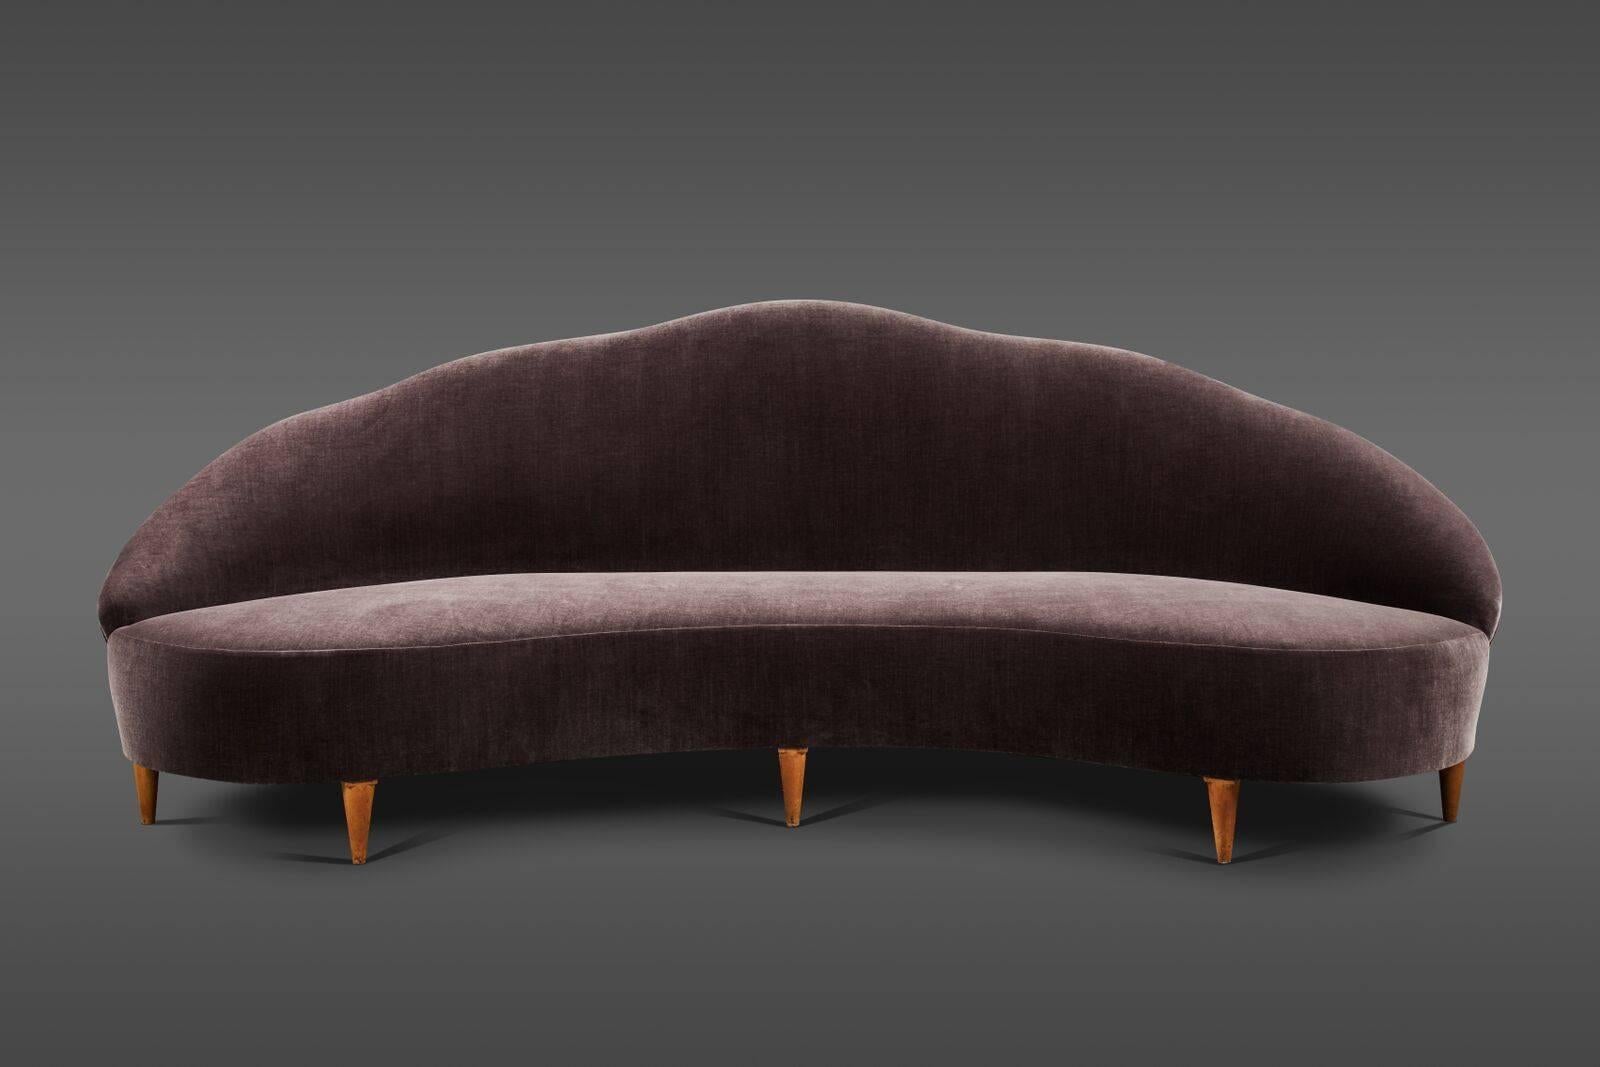 Curvilinear camelback sofa custom upholstered in sumptuous Claremont velvet with faint striations.
 